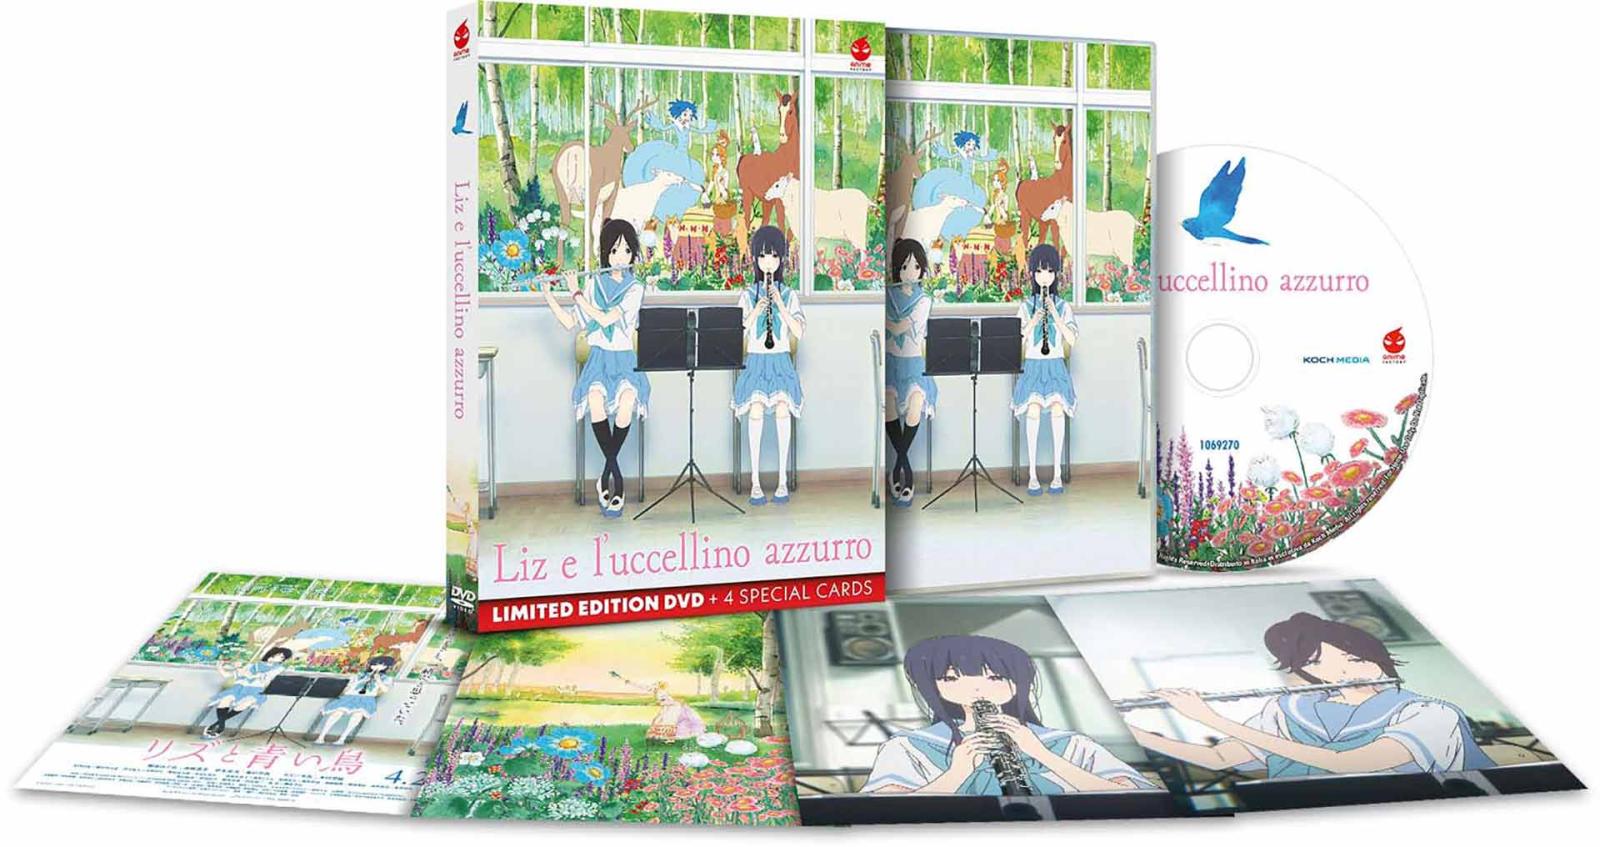 Liz e l'Uccellino Azzurro - Limited Edition DVD + 4 Special Cards (DVD) Image 3